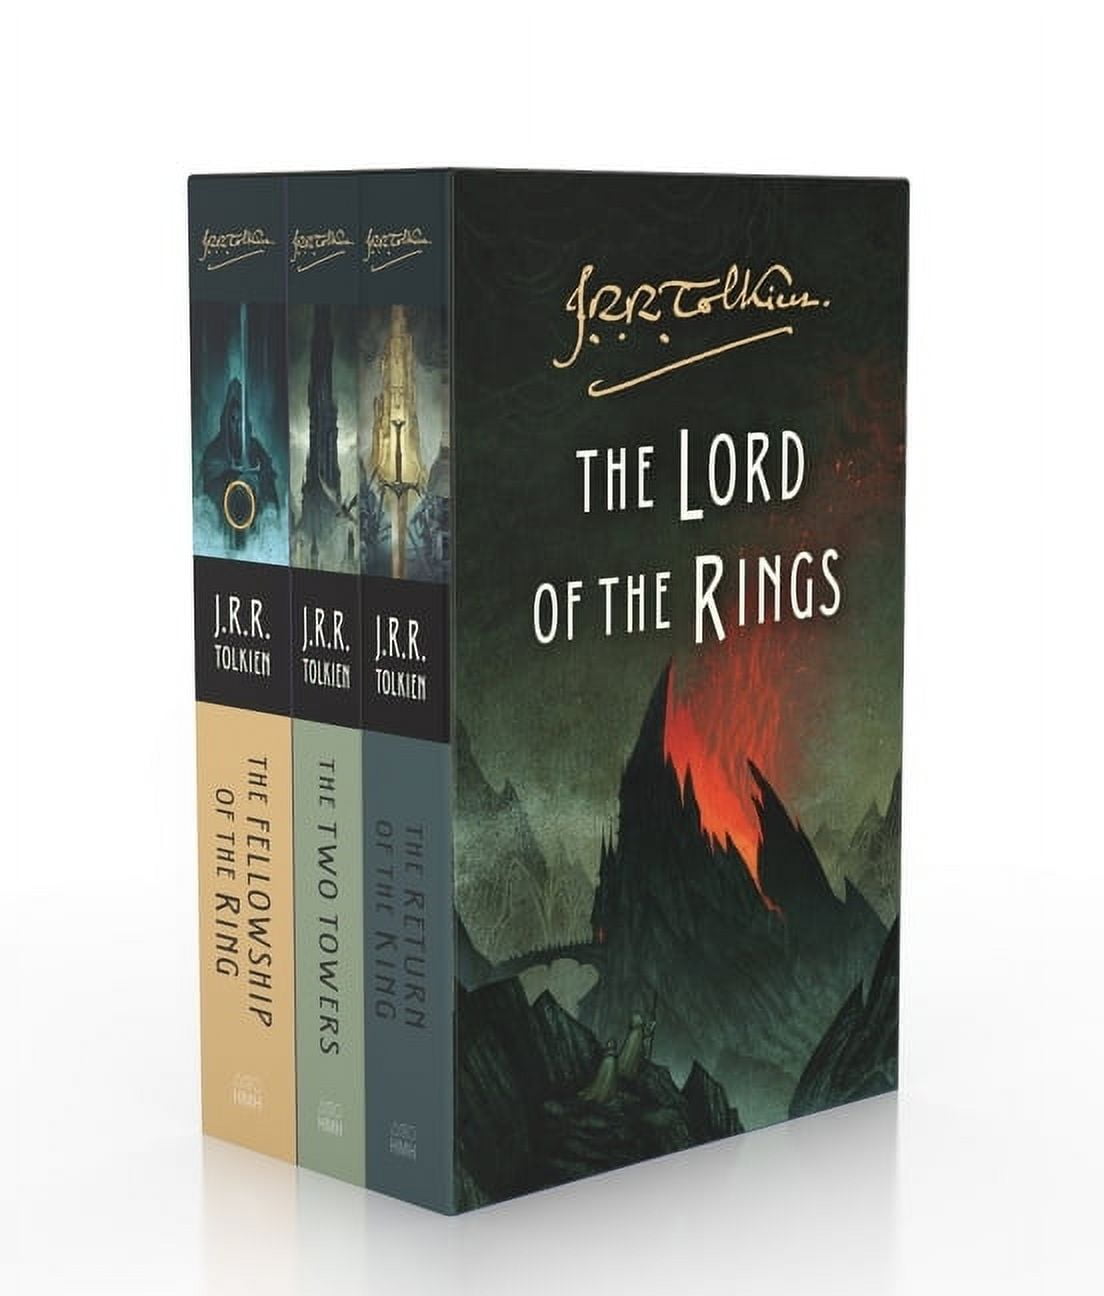 Return of the King: The Lord of the Rings, Part 3